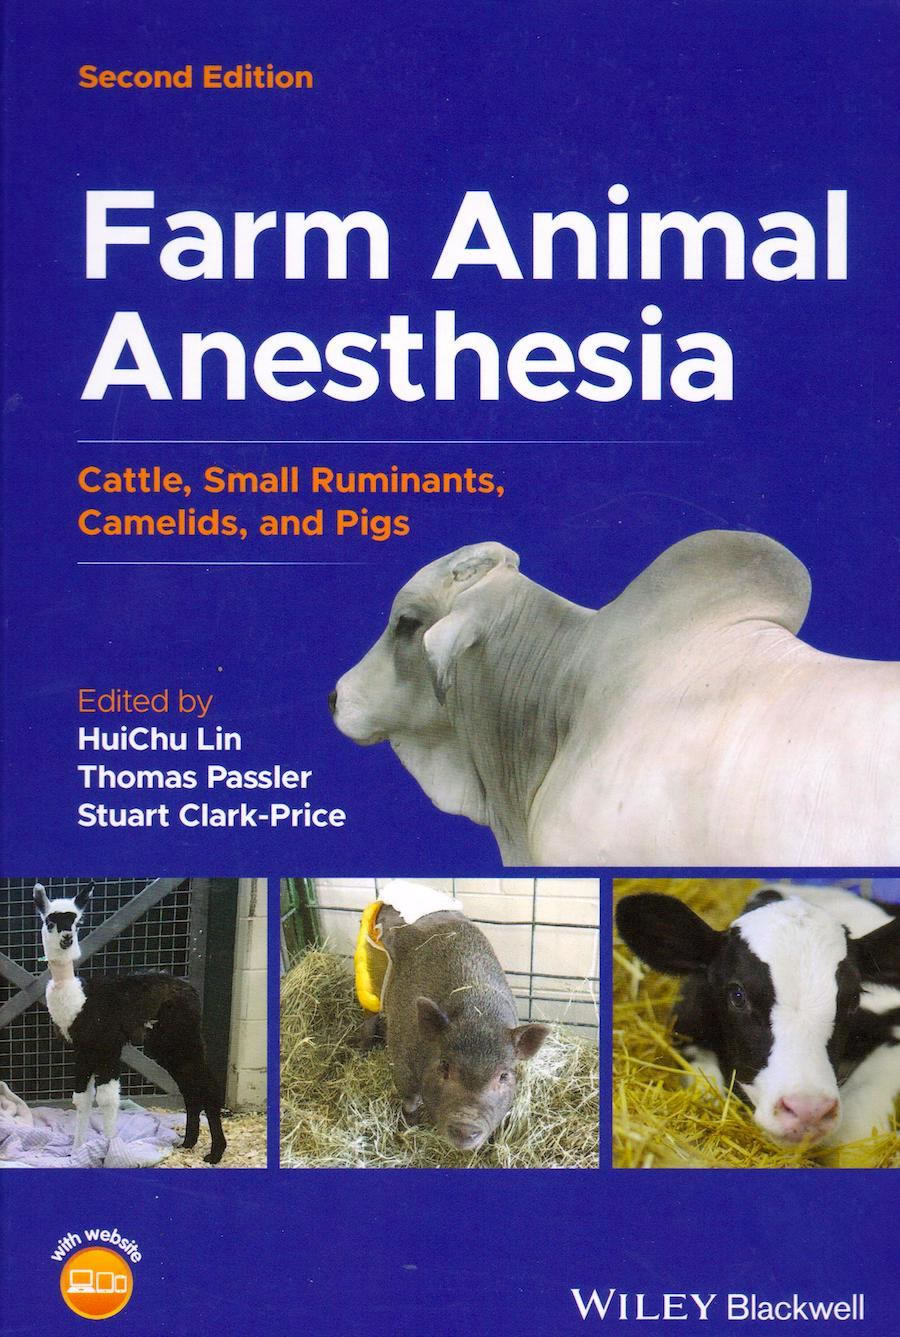 Farm animal anesthesia - Cattle, Small Ruminants, Camelids, and Pigs